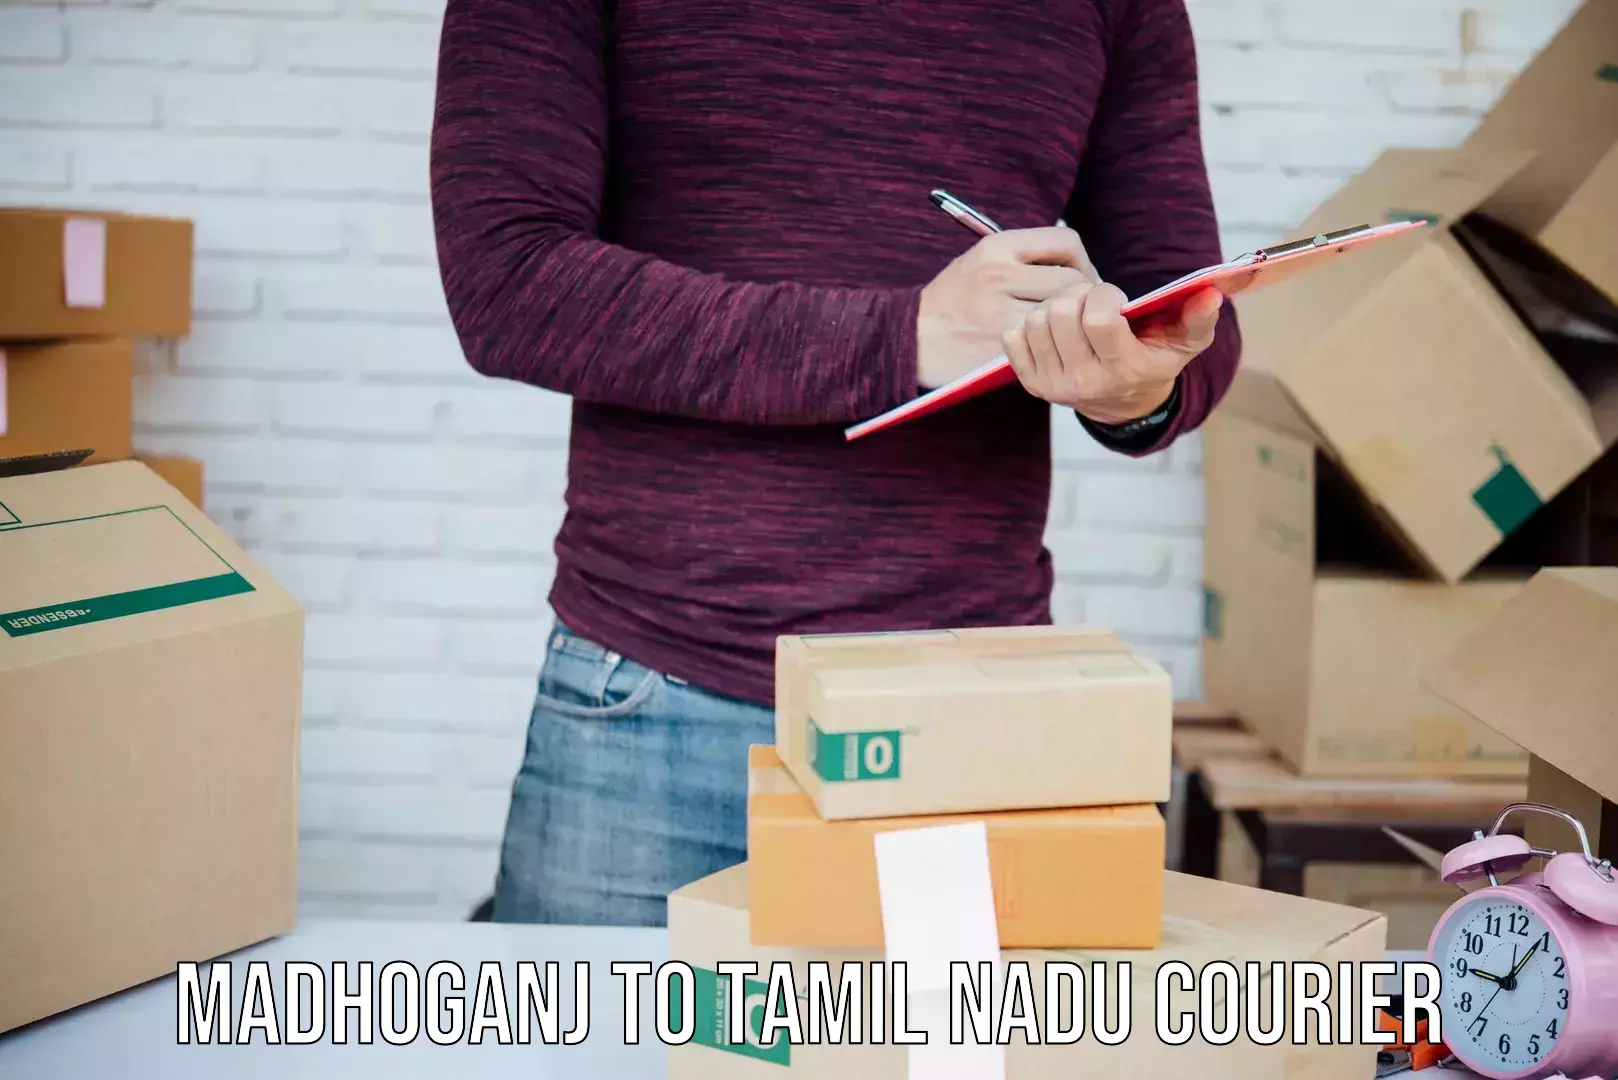 State-of-the-art courier technology Madhoganj to Periyakulam